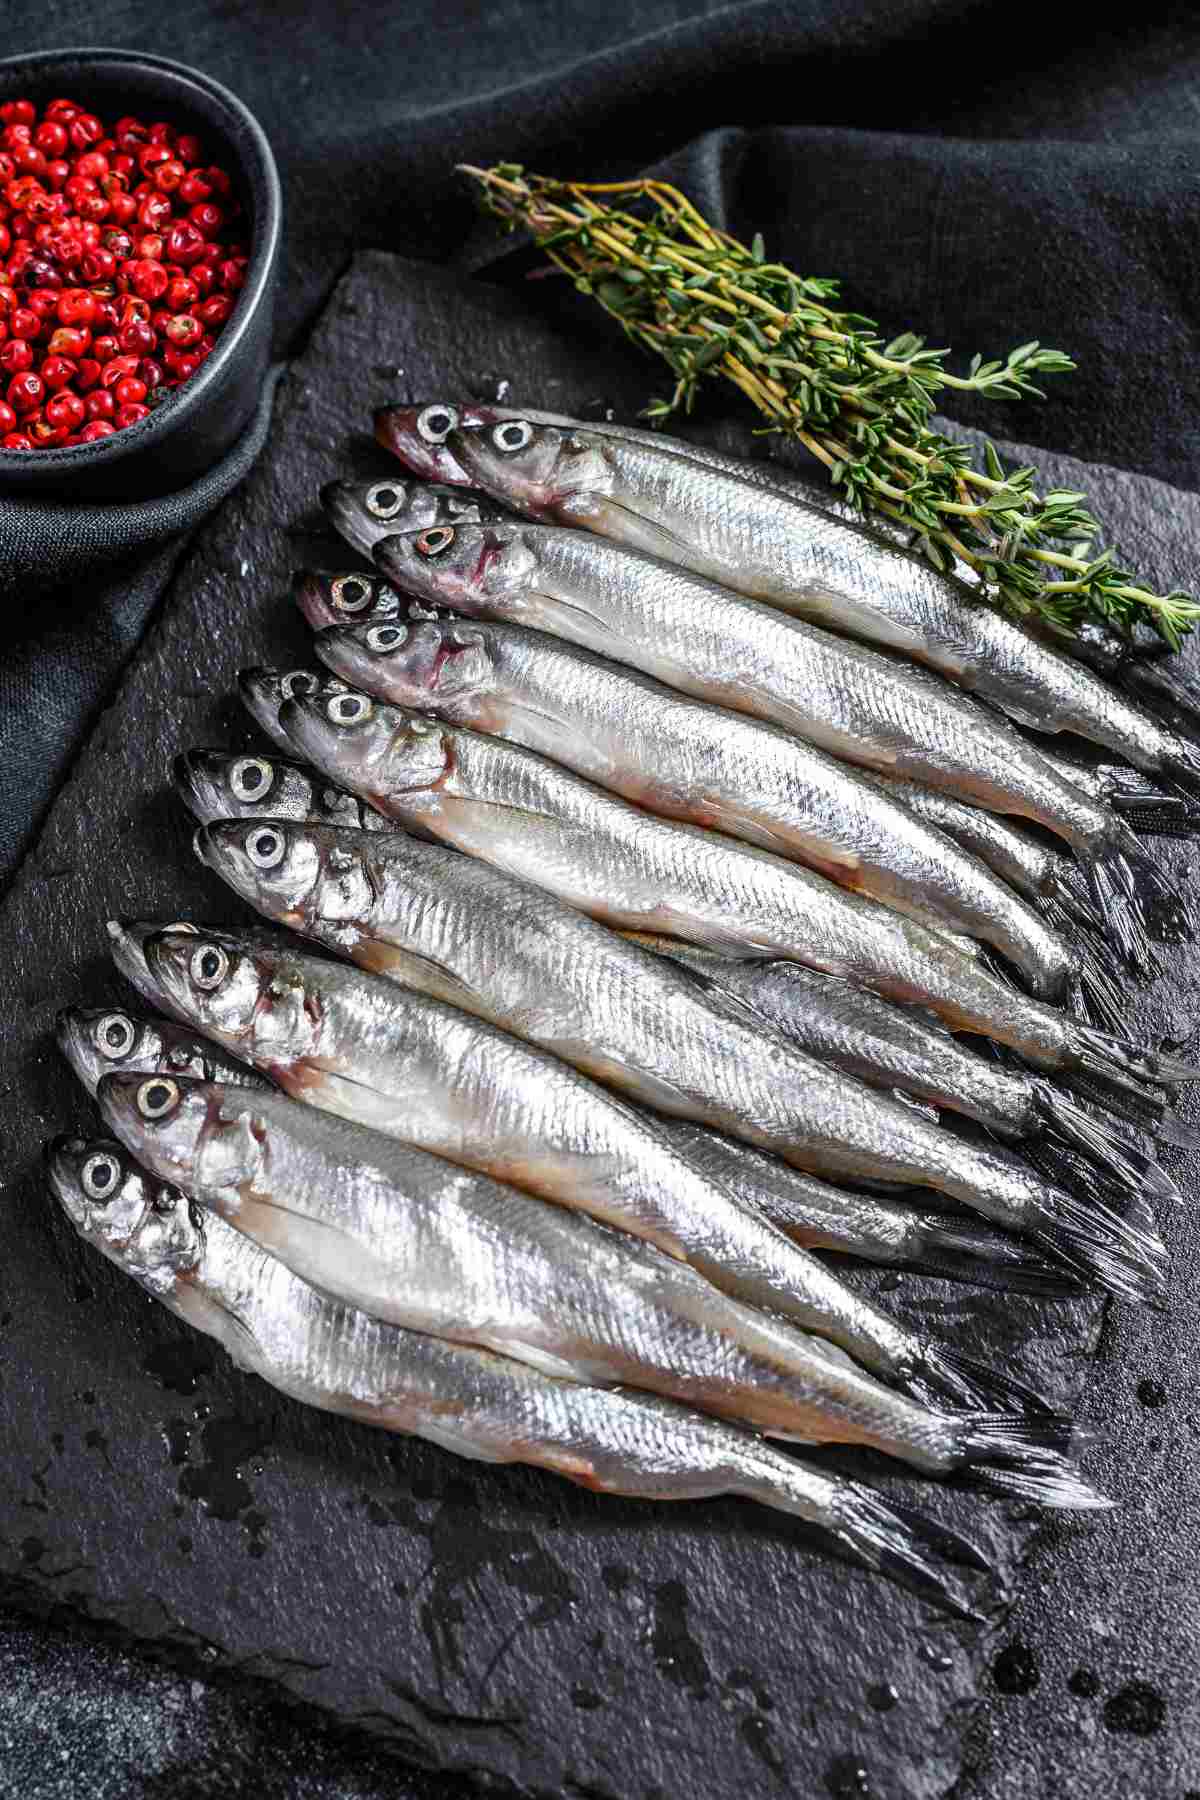 Crispy and flavorful, fried smelt fish is better than chips with dip any day! Coated in a mouthwatering herb mixture, these tiny crispy bites are actually irresistible. Find out more about smelt fish and how to fry up the tastiest recipe ever.